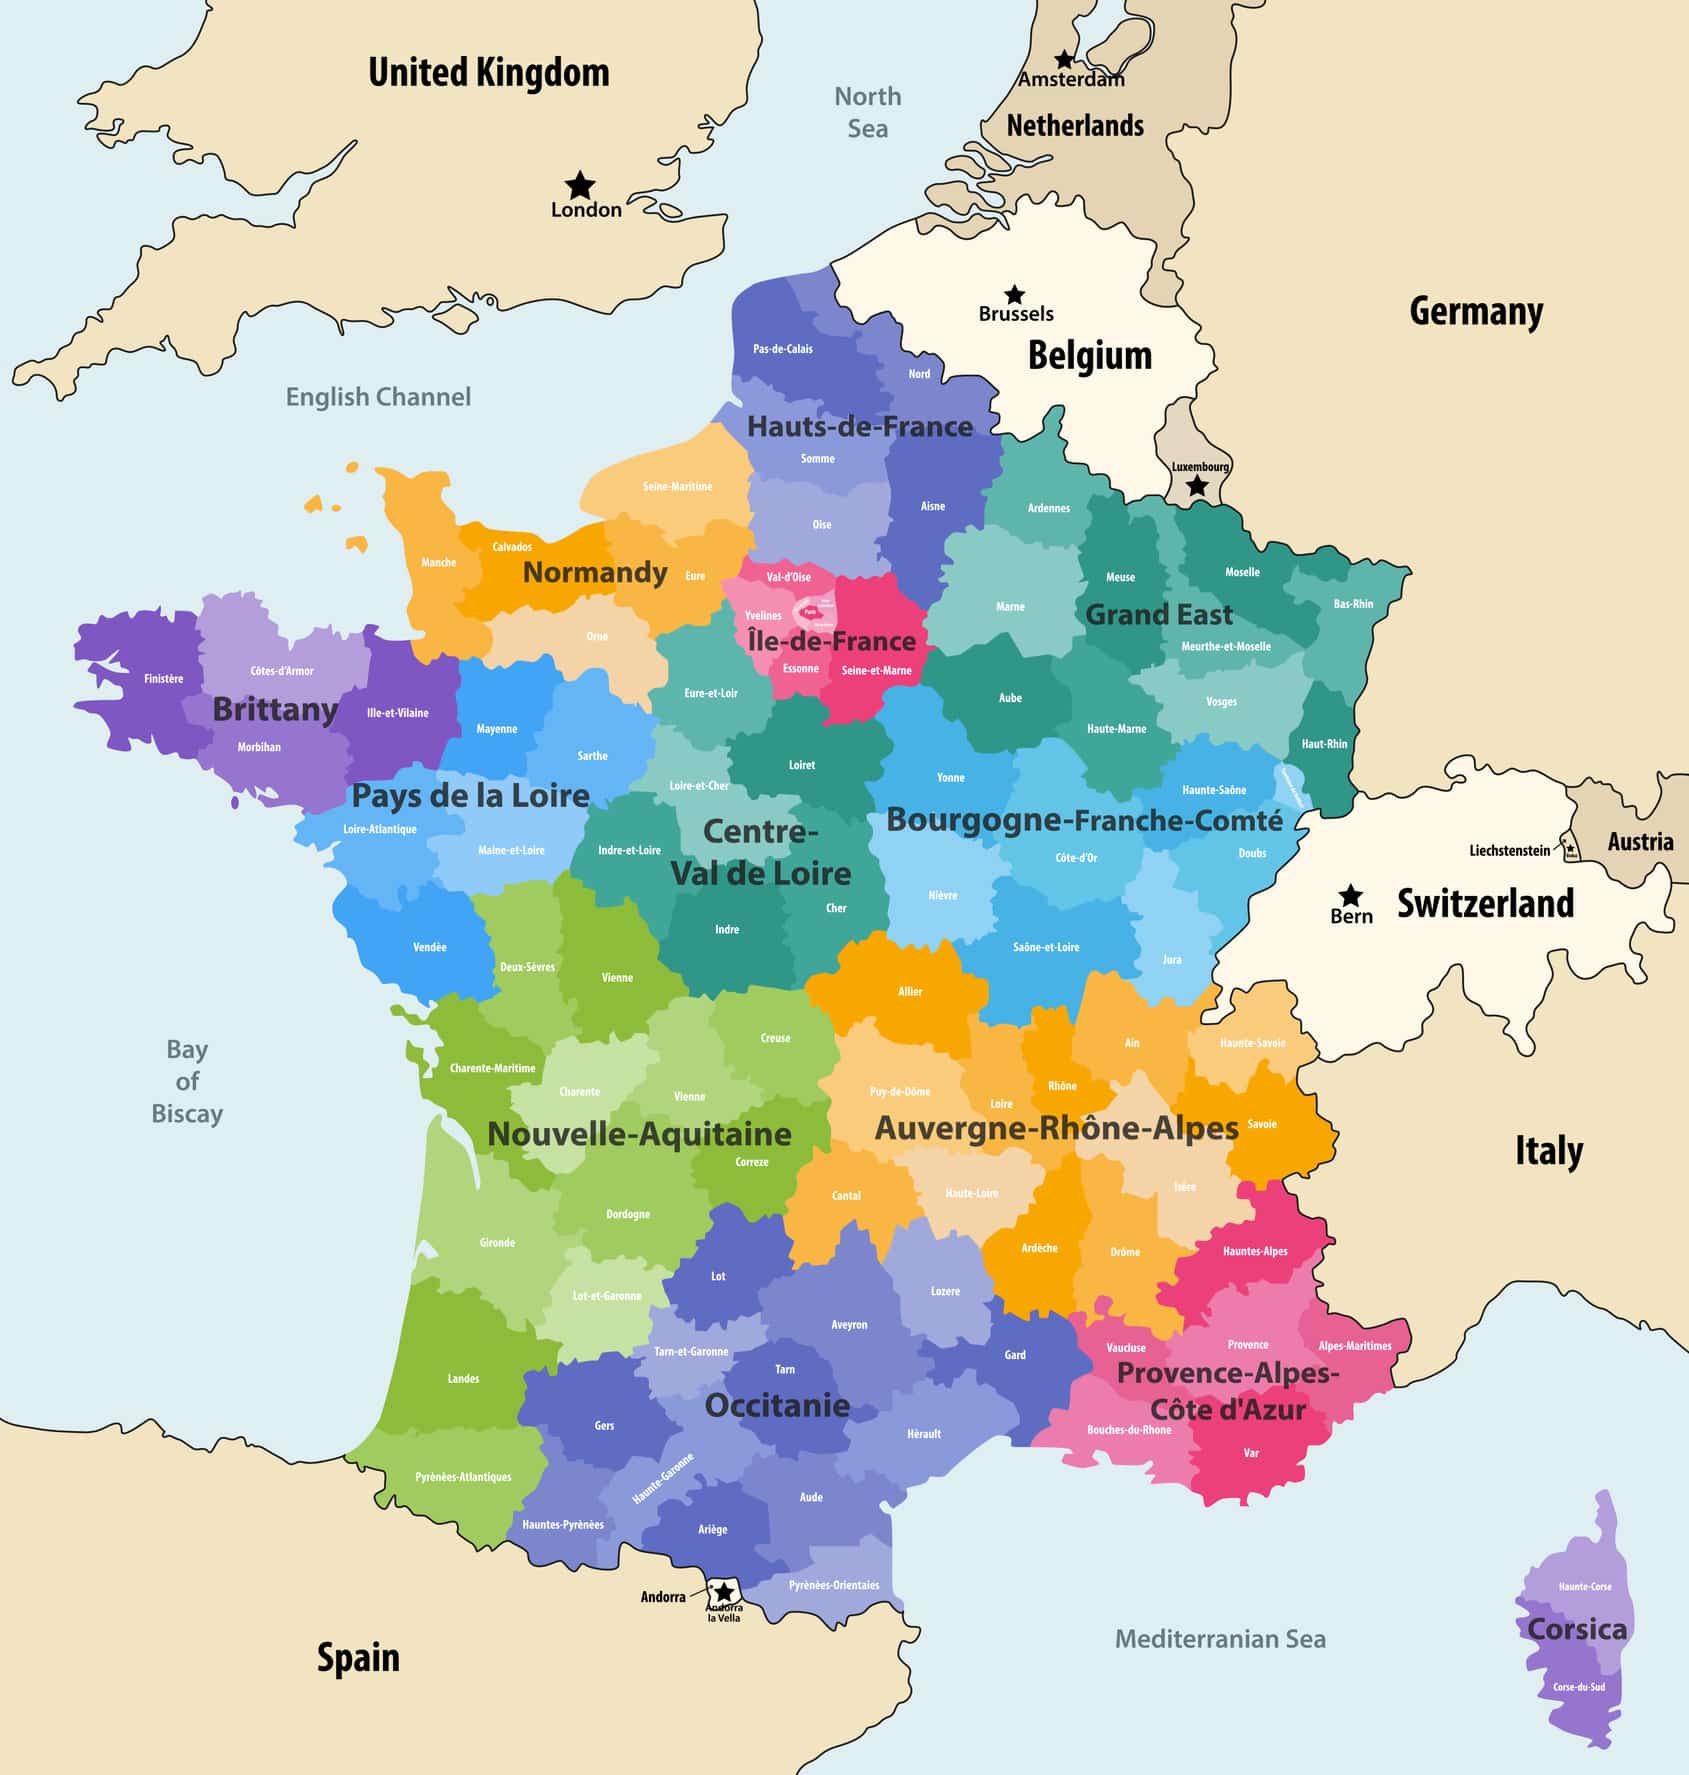 The administrative regions and departments of France